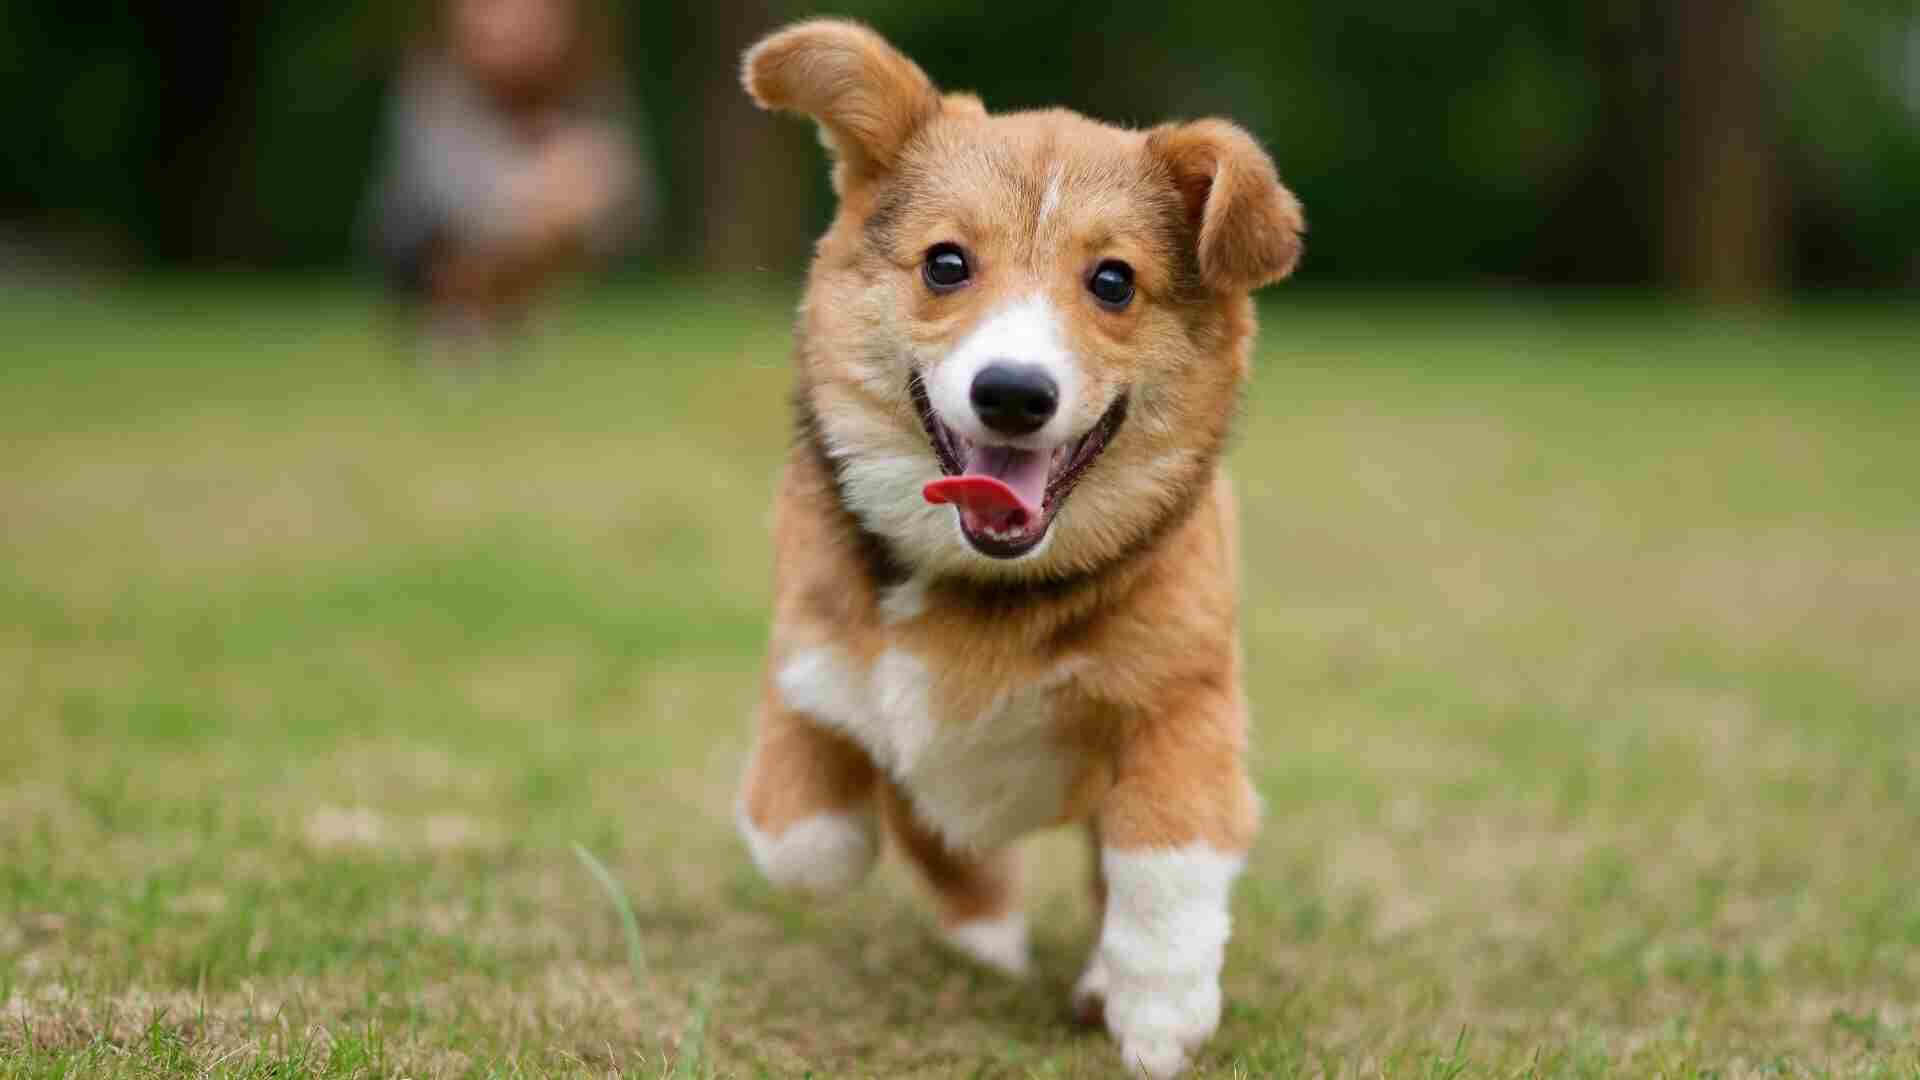 Can Corgis Run with You: 5 Important Tips to Know